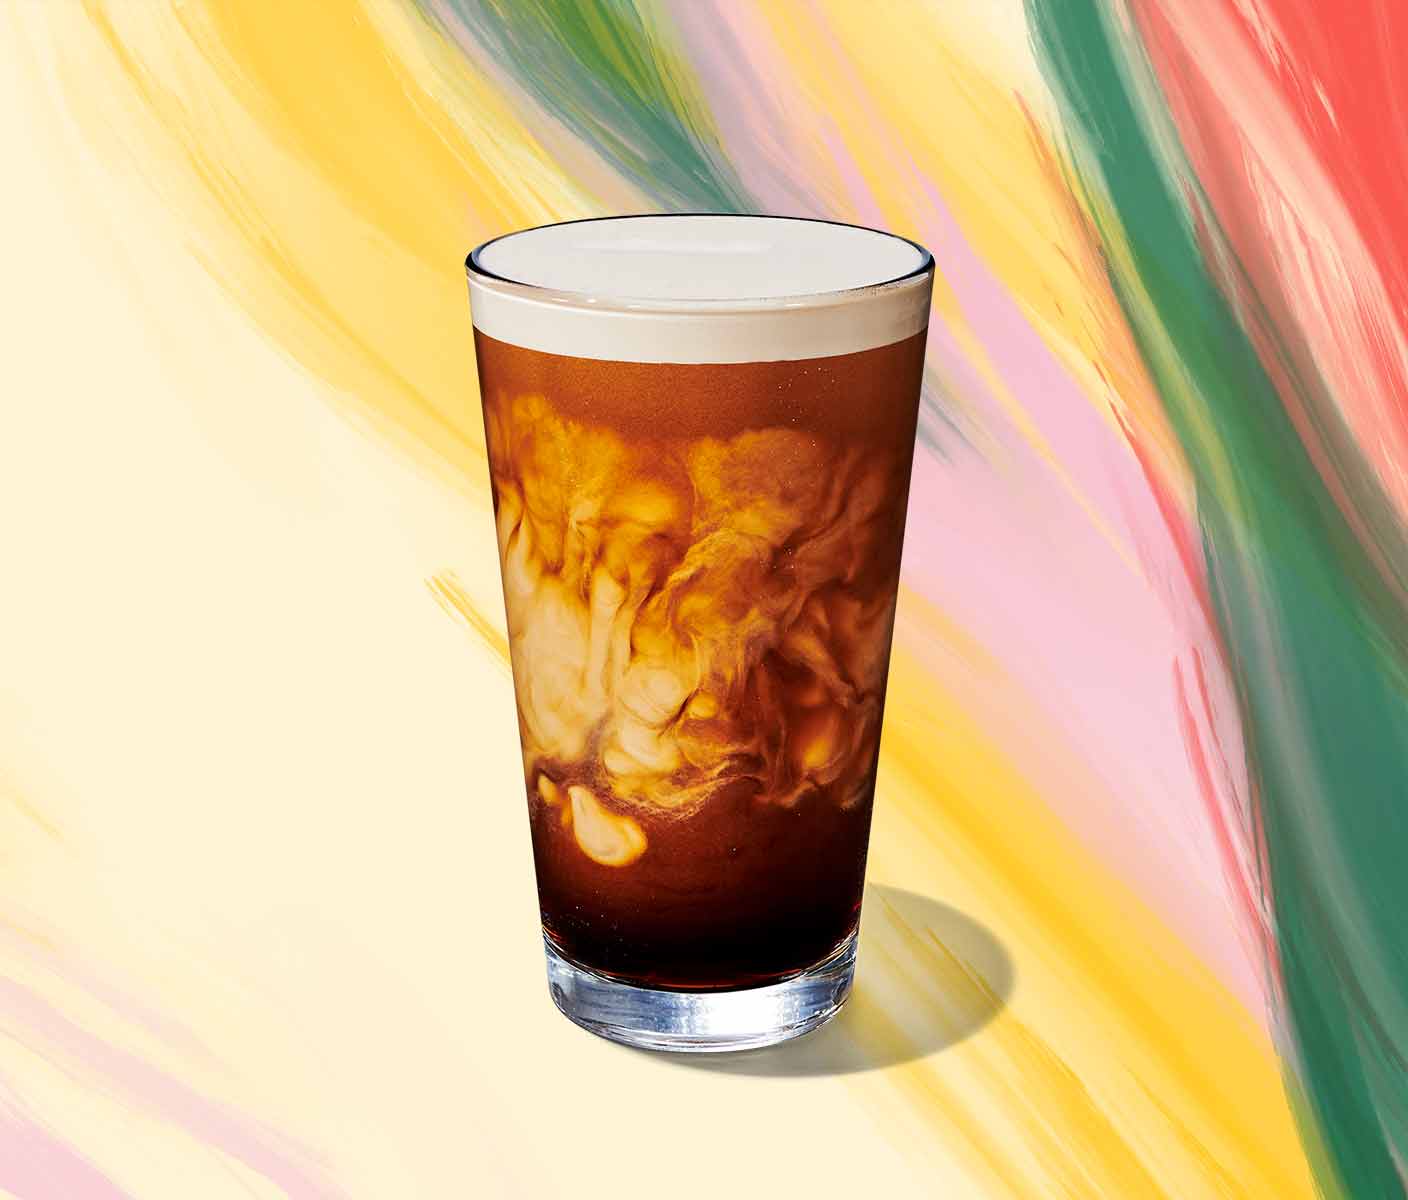 Cold coffee drink with swirls of cream in a tall glass.